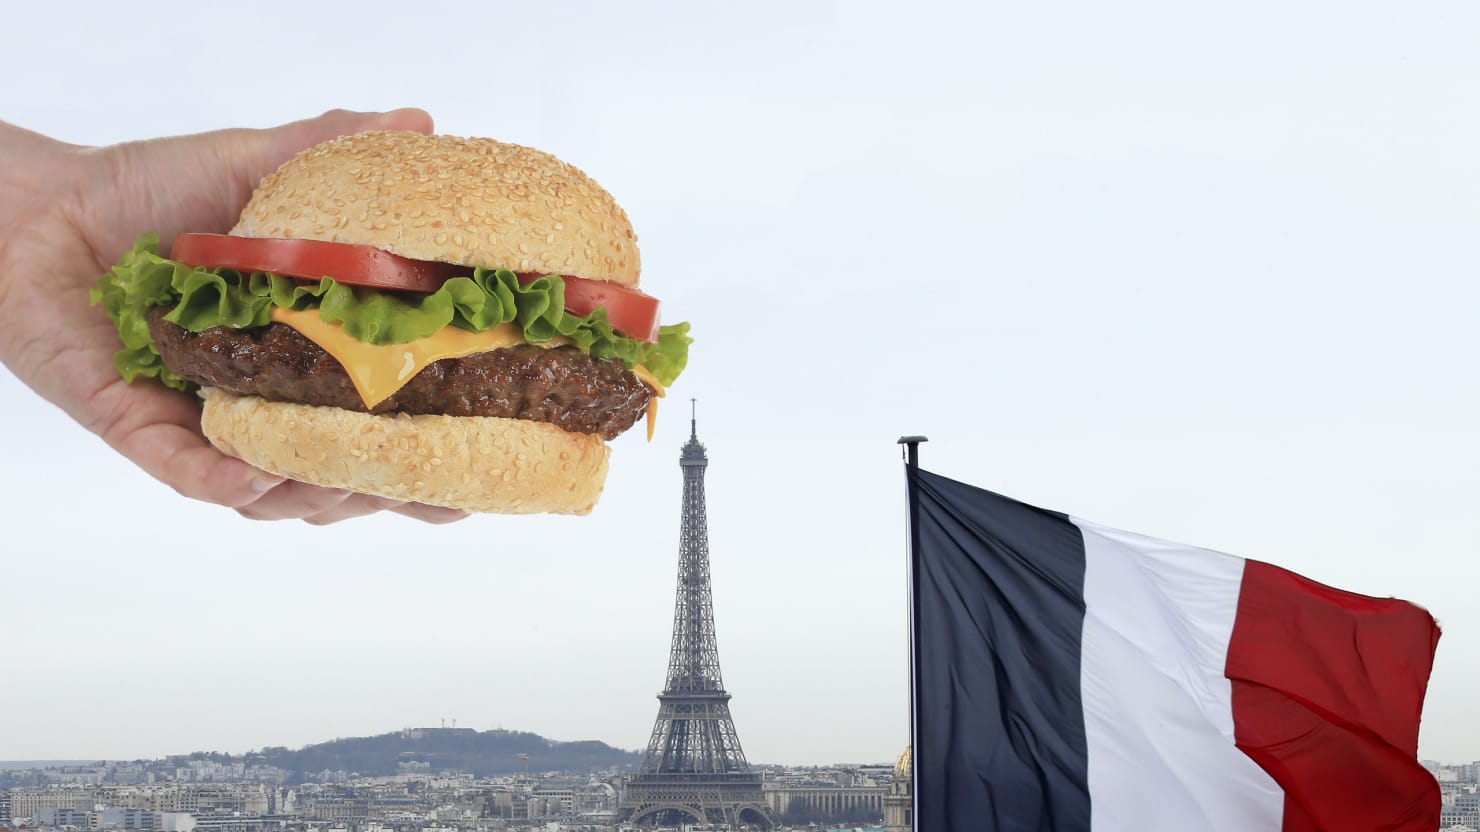 How Paris Became Obsessed With the Hamburger